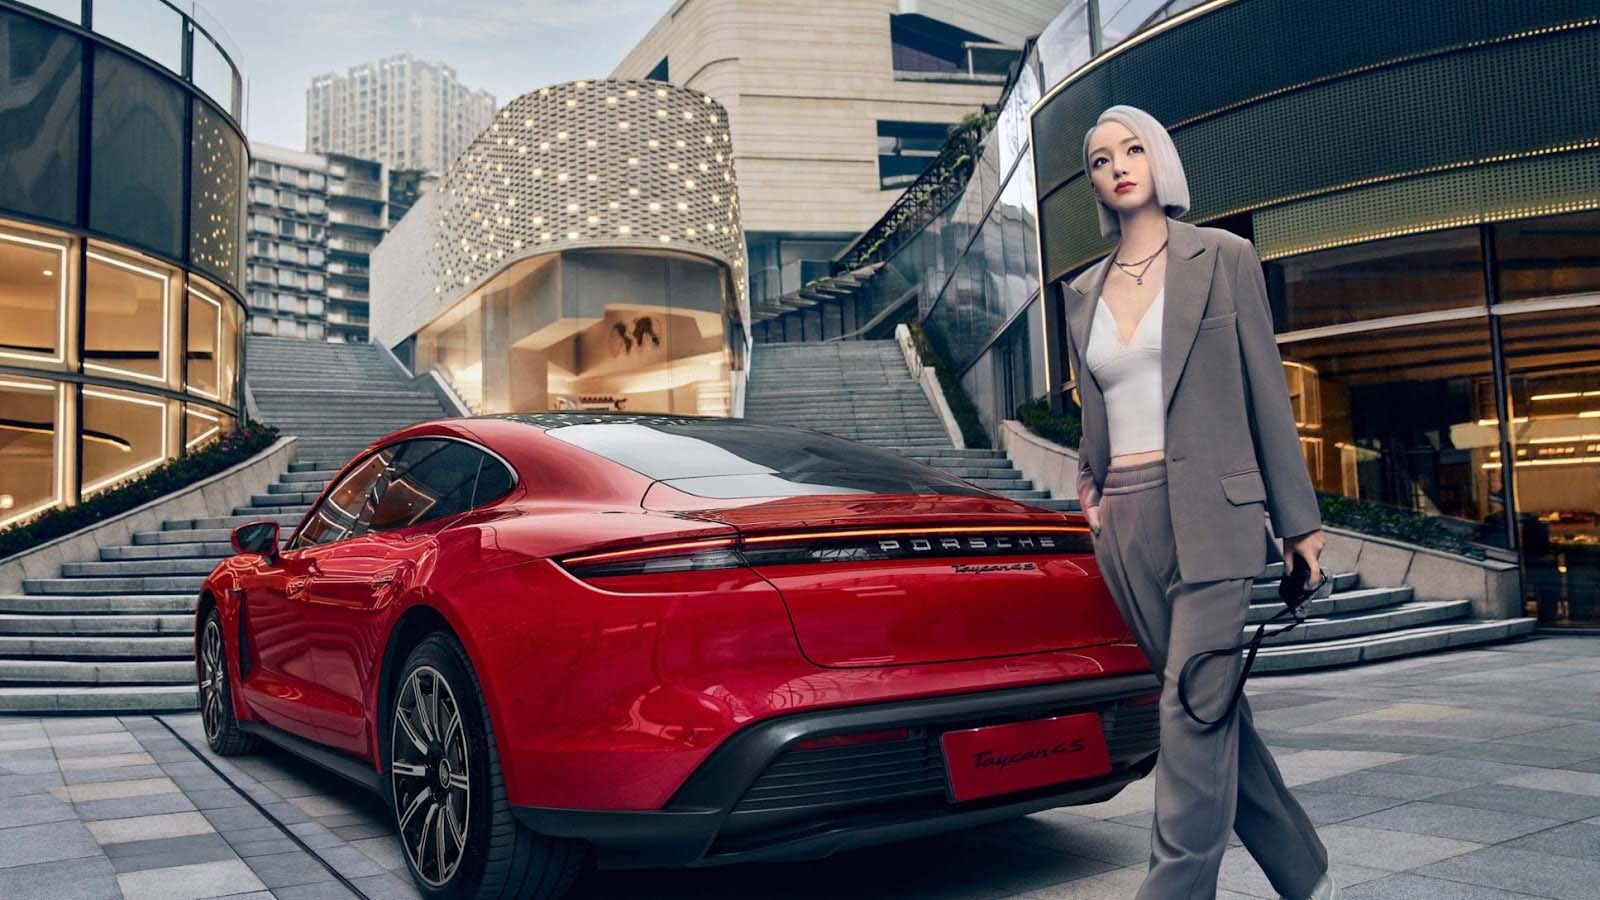 From Prada and Porsche, to Tissot and Tesla: Brands collaborate with China's virtual humans